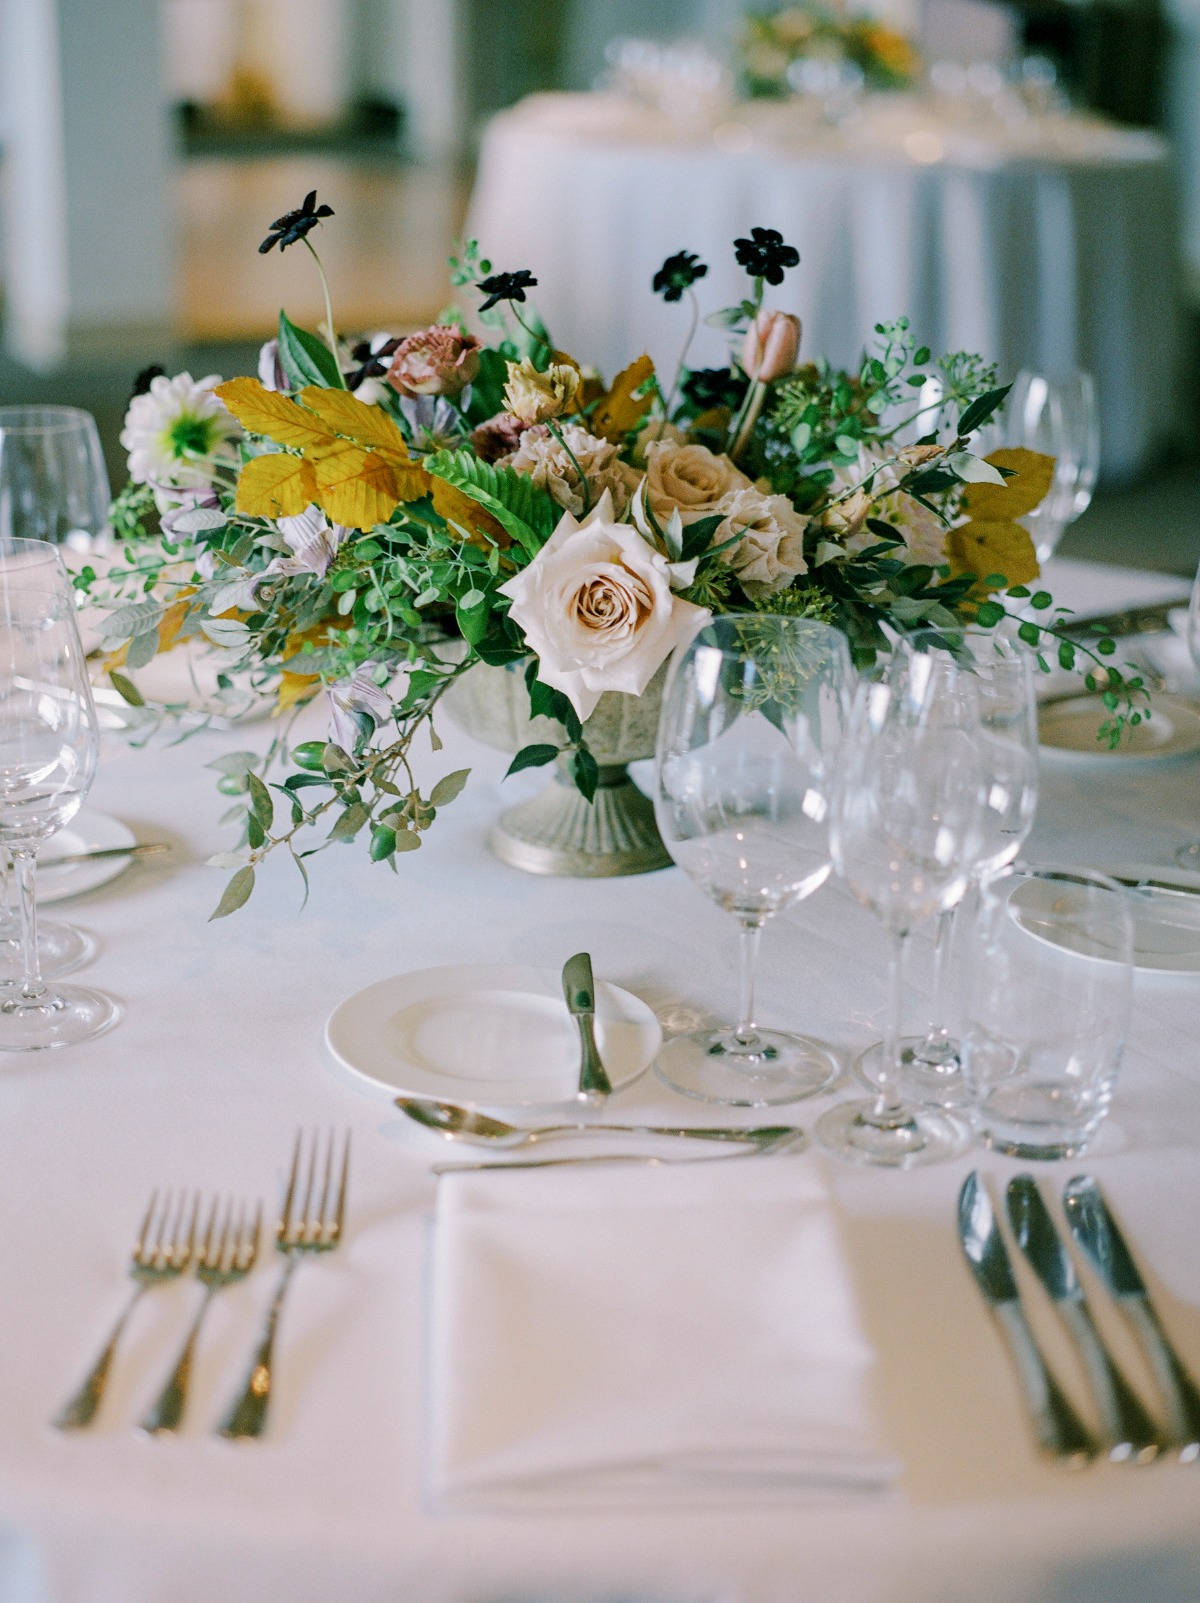 floral arrangements with leaves